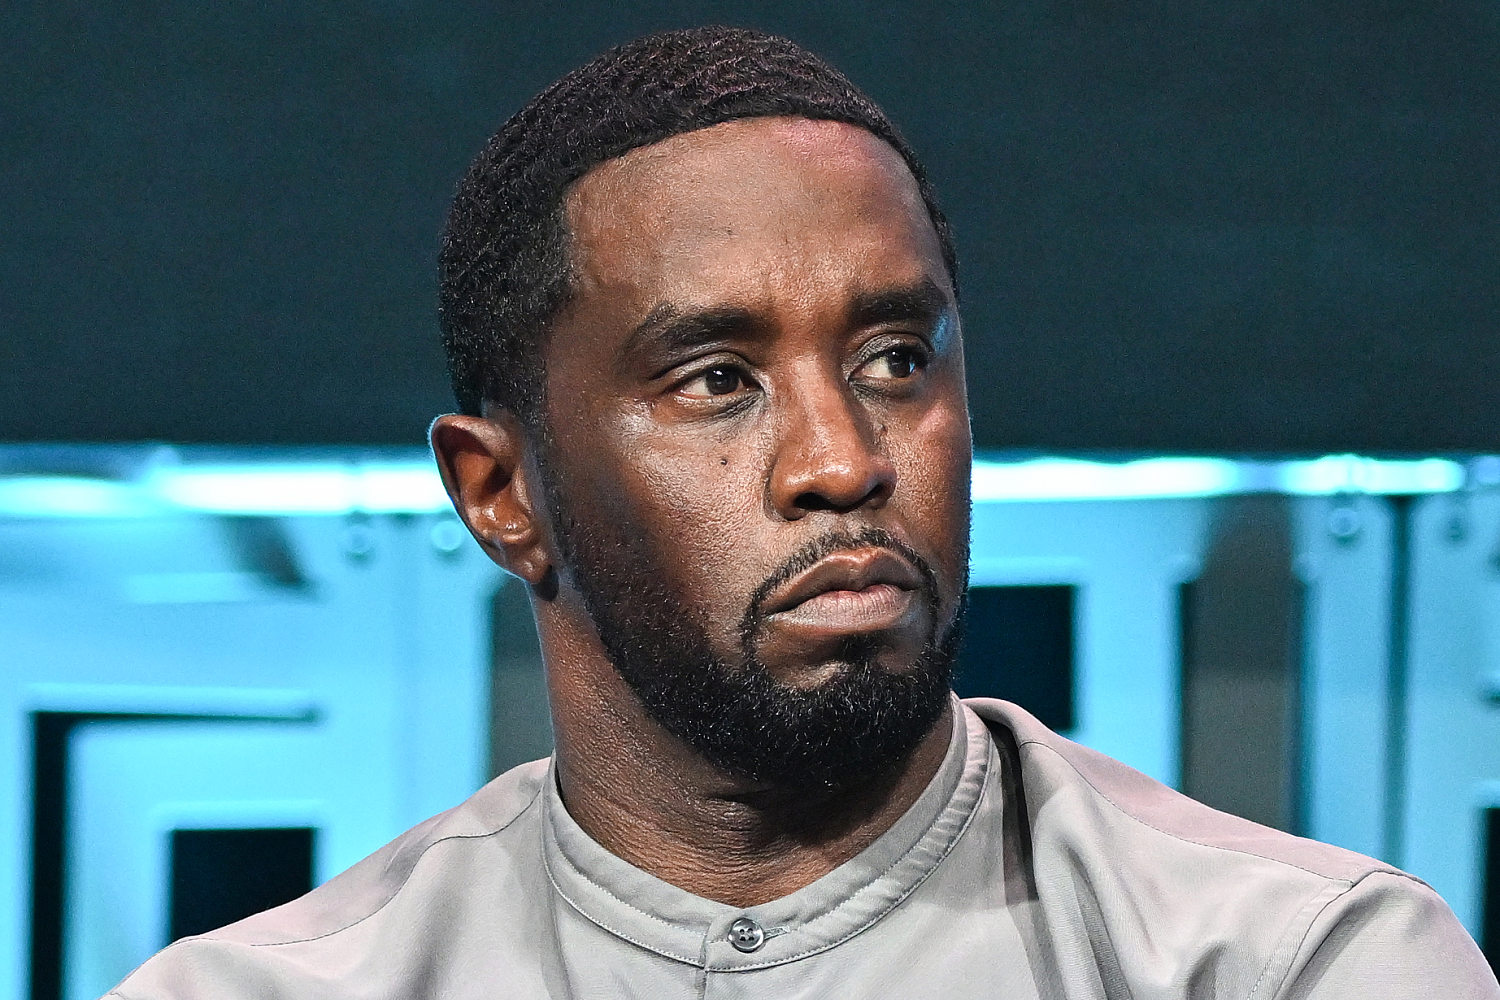 Sean ‘Diddy’ Combs ‘truly sorry’ for behavior in video that appears to show him beating ex-girlfriend